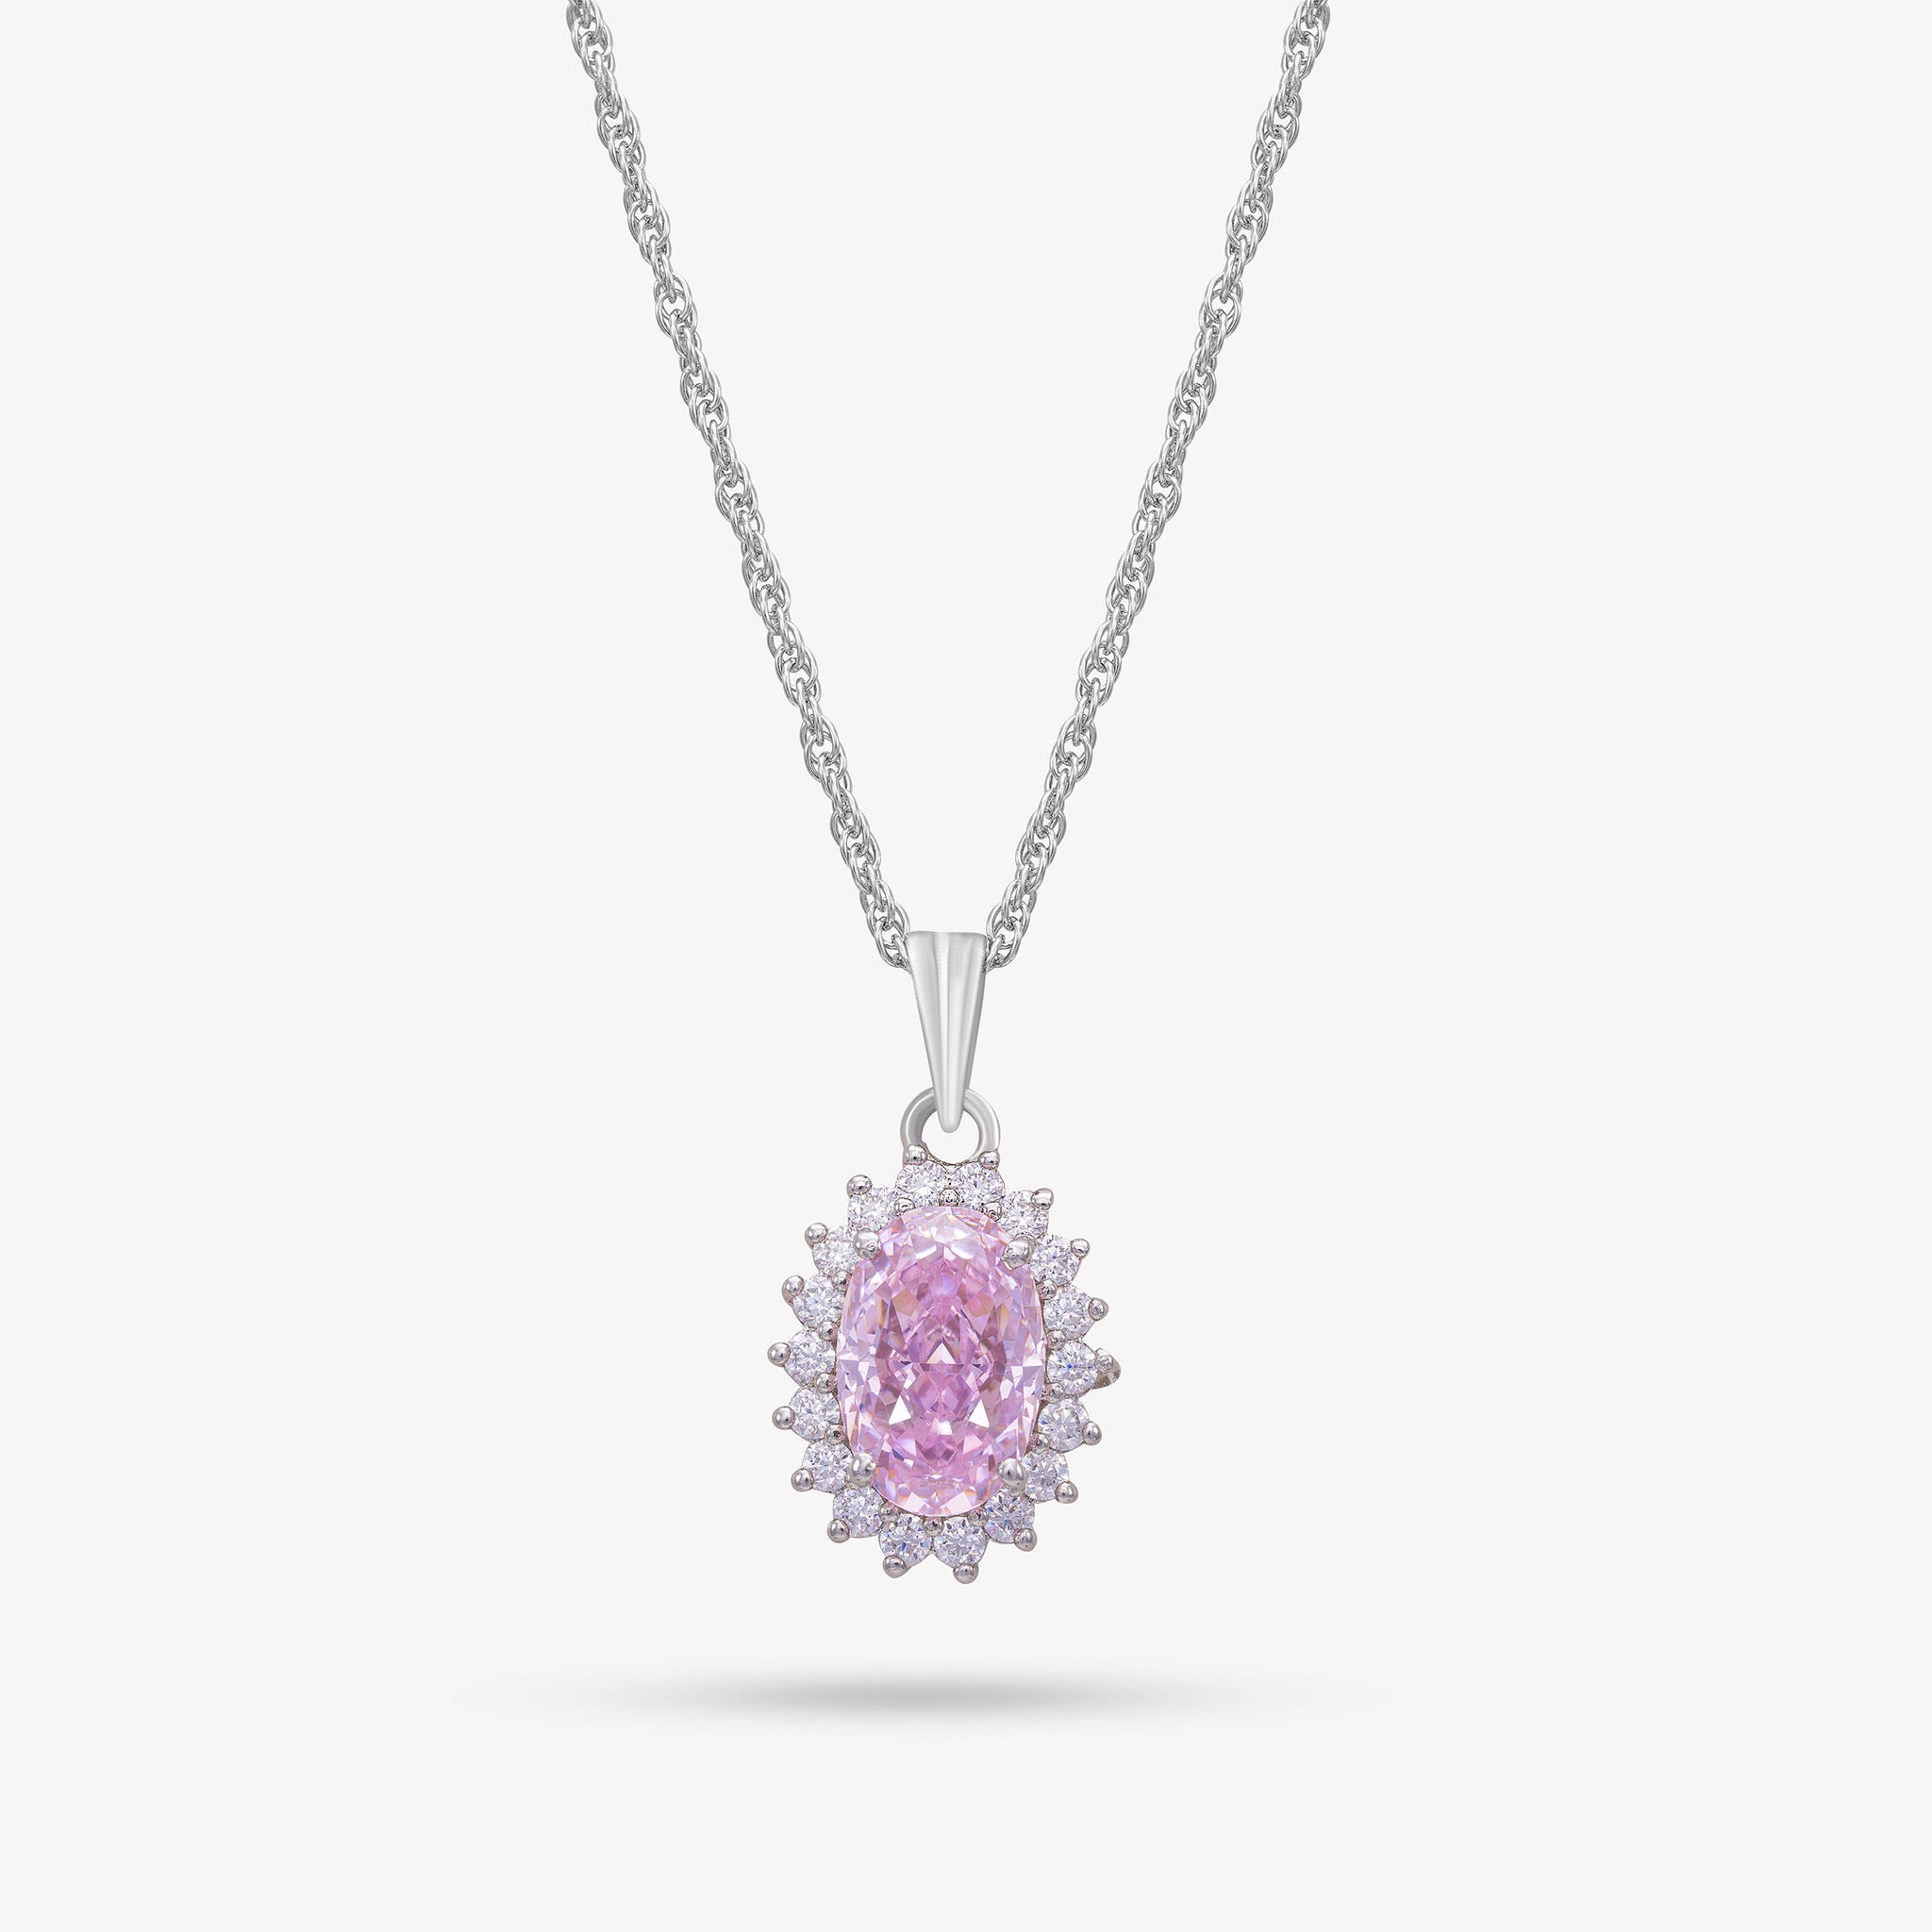 Halo Set Oval Pink Sapphire Premium Natural Gemstone Pendant With Rope Chain In 925 Sterling Silver